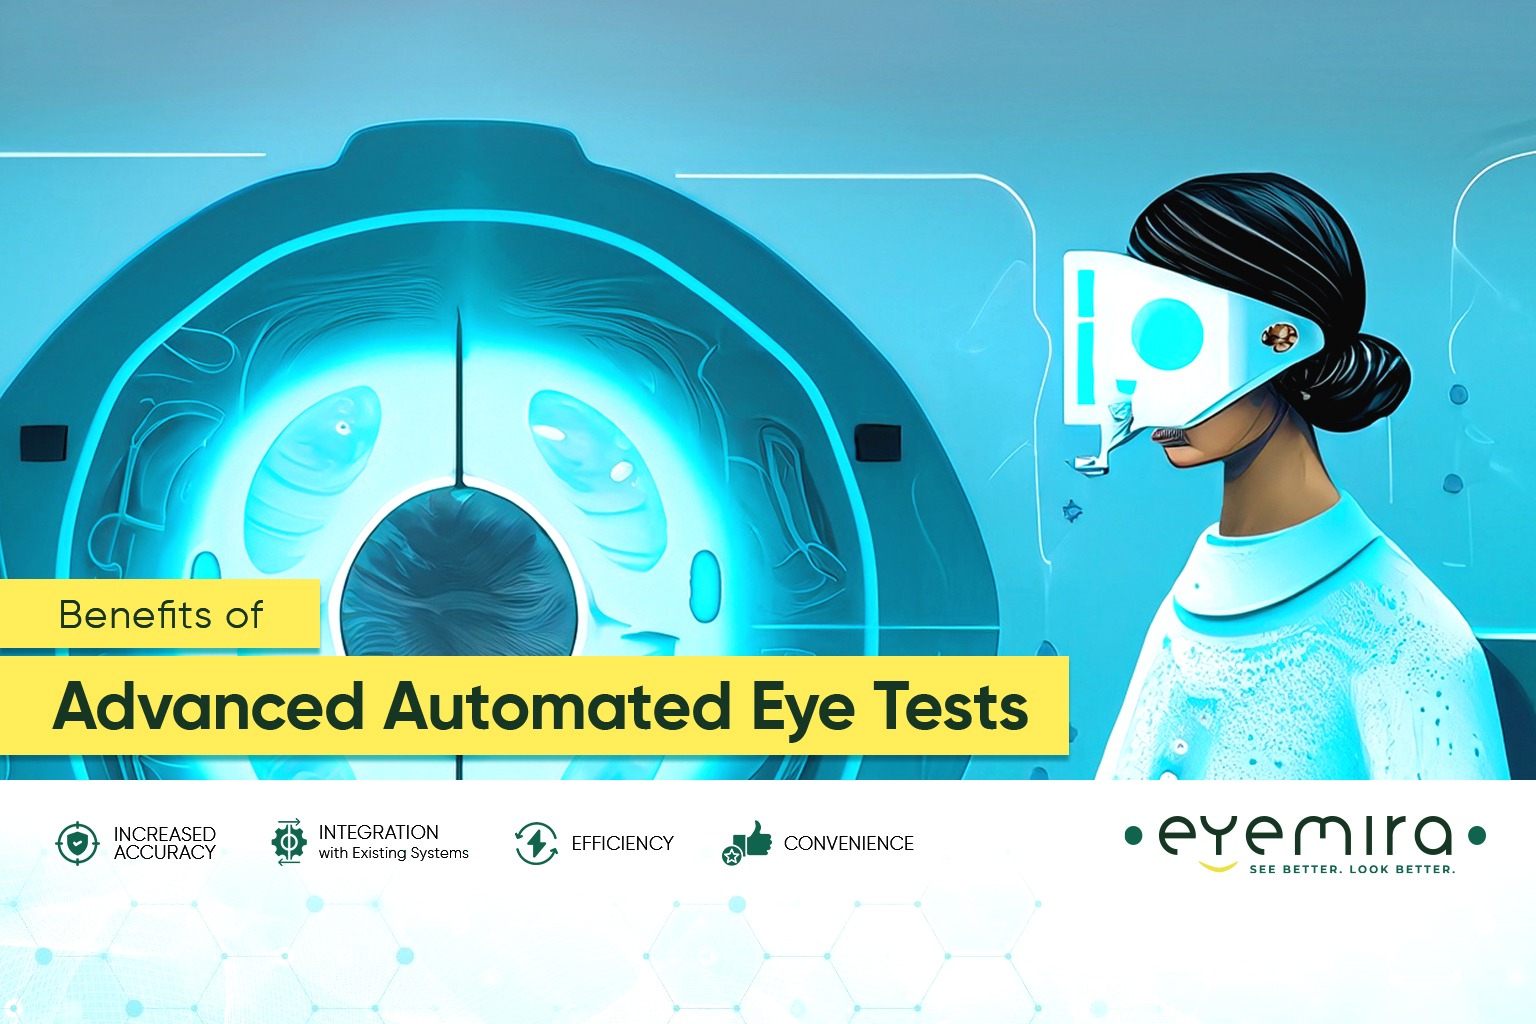 Benefits of Advanced Automated Eye Tests